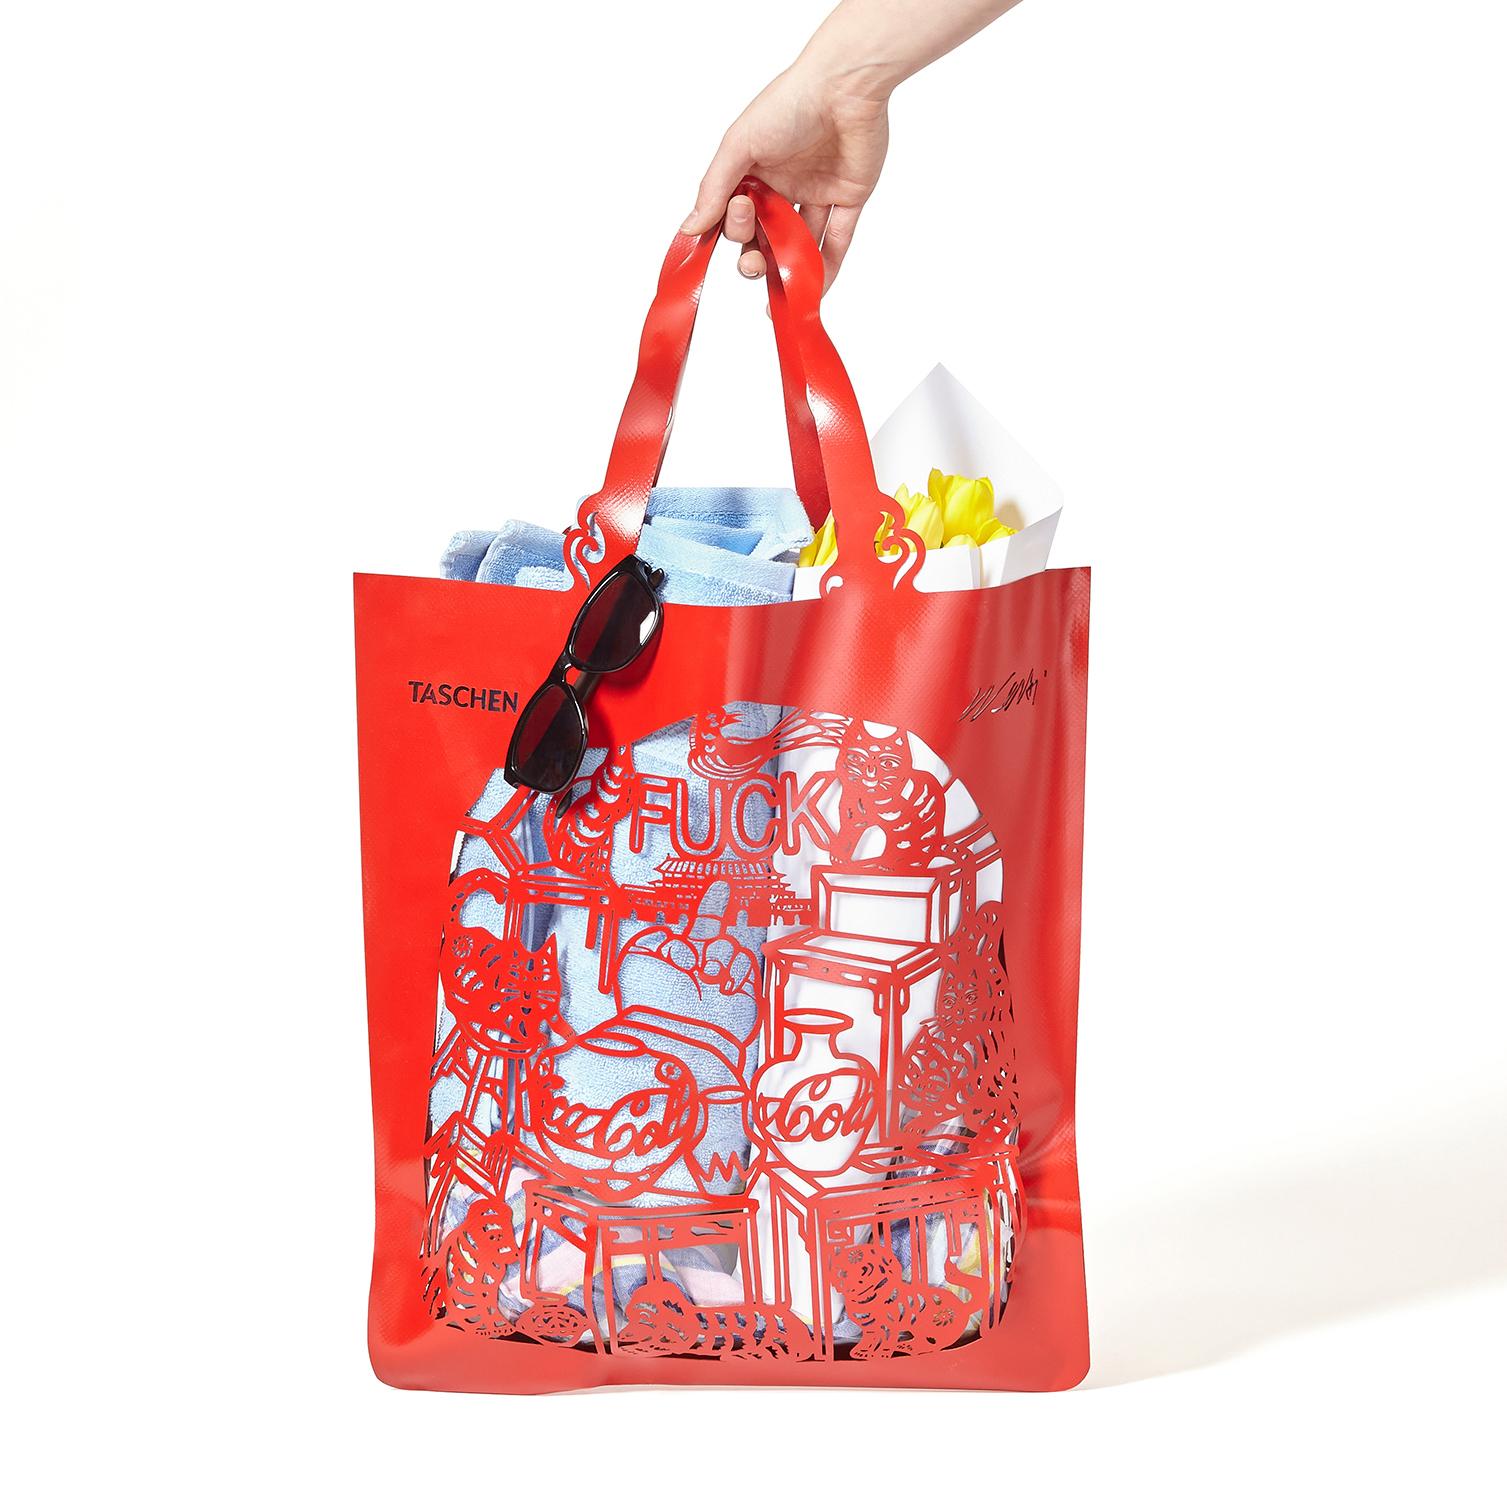 Red PVC bag with transparent inlay
Measures: 18.5 x 25.4 inches (without handles)
edition of 2,500
custom gift box

This limited edition tote by Ai Weiwei is both the ultimate beach-to-dinner tote and beautiful enough to frame and hang on your